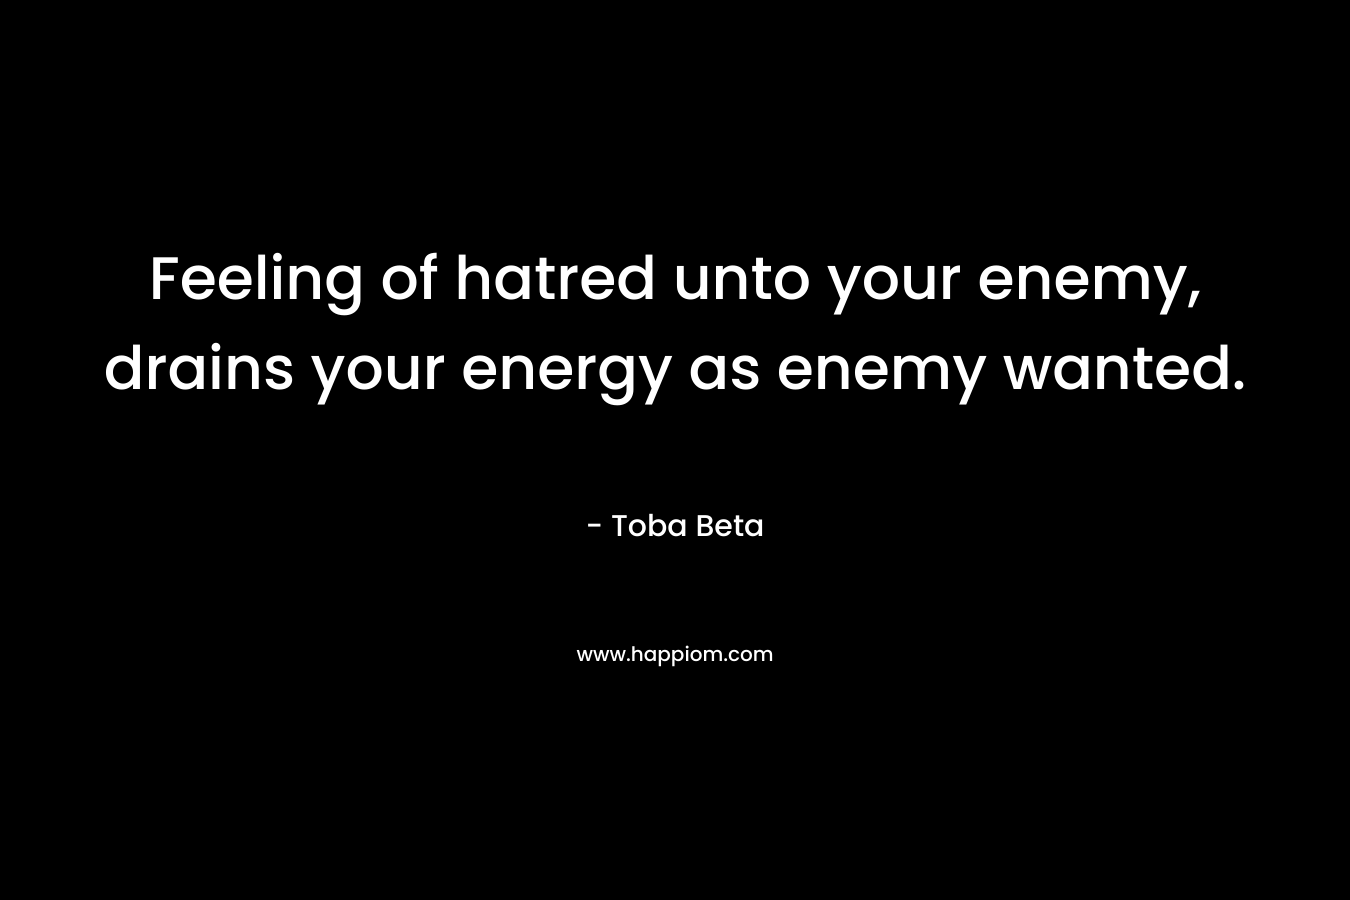 Feeling of hatred unto your enemy, drains your energy as enemy wanted. – Toba Beta